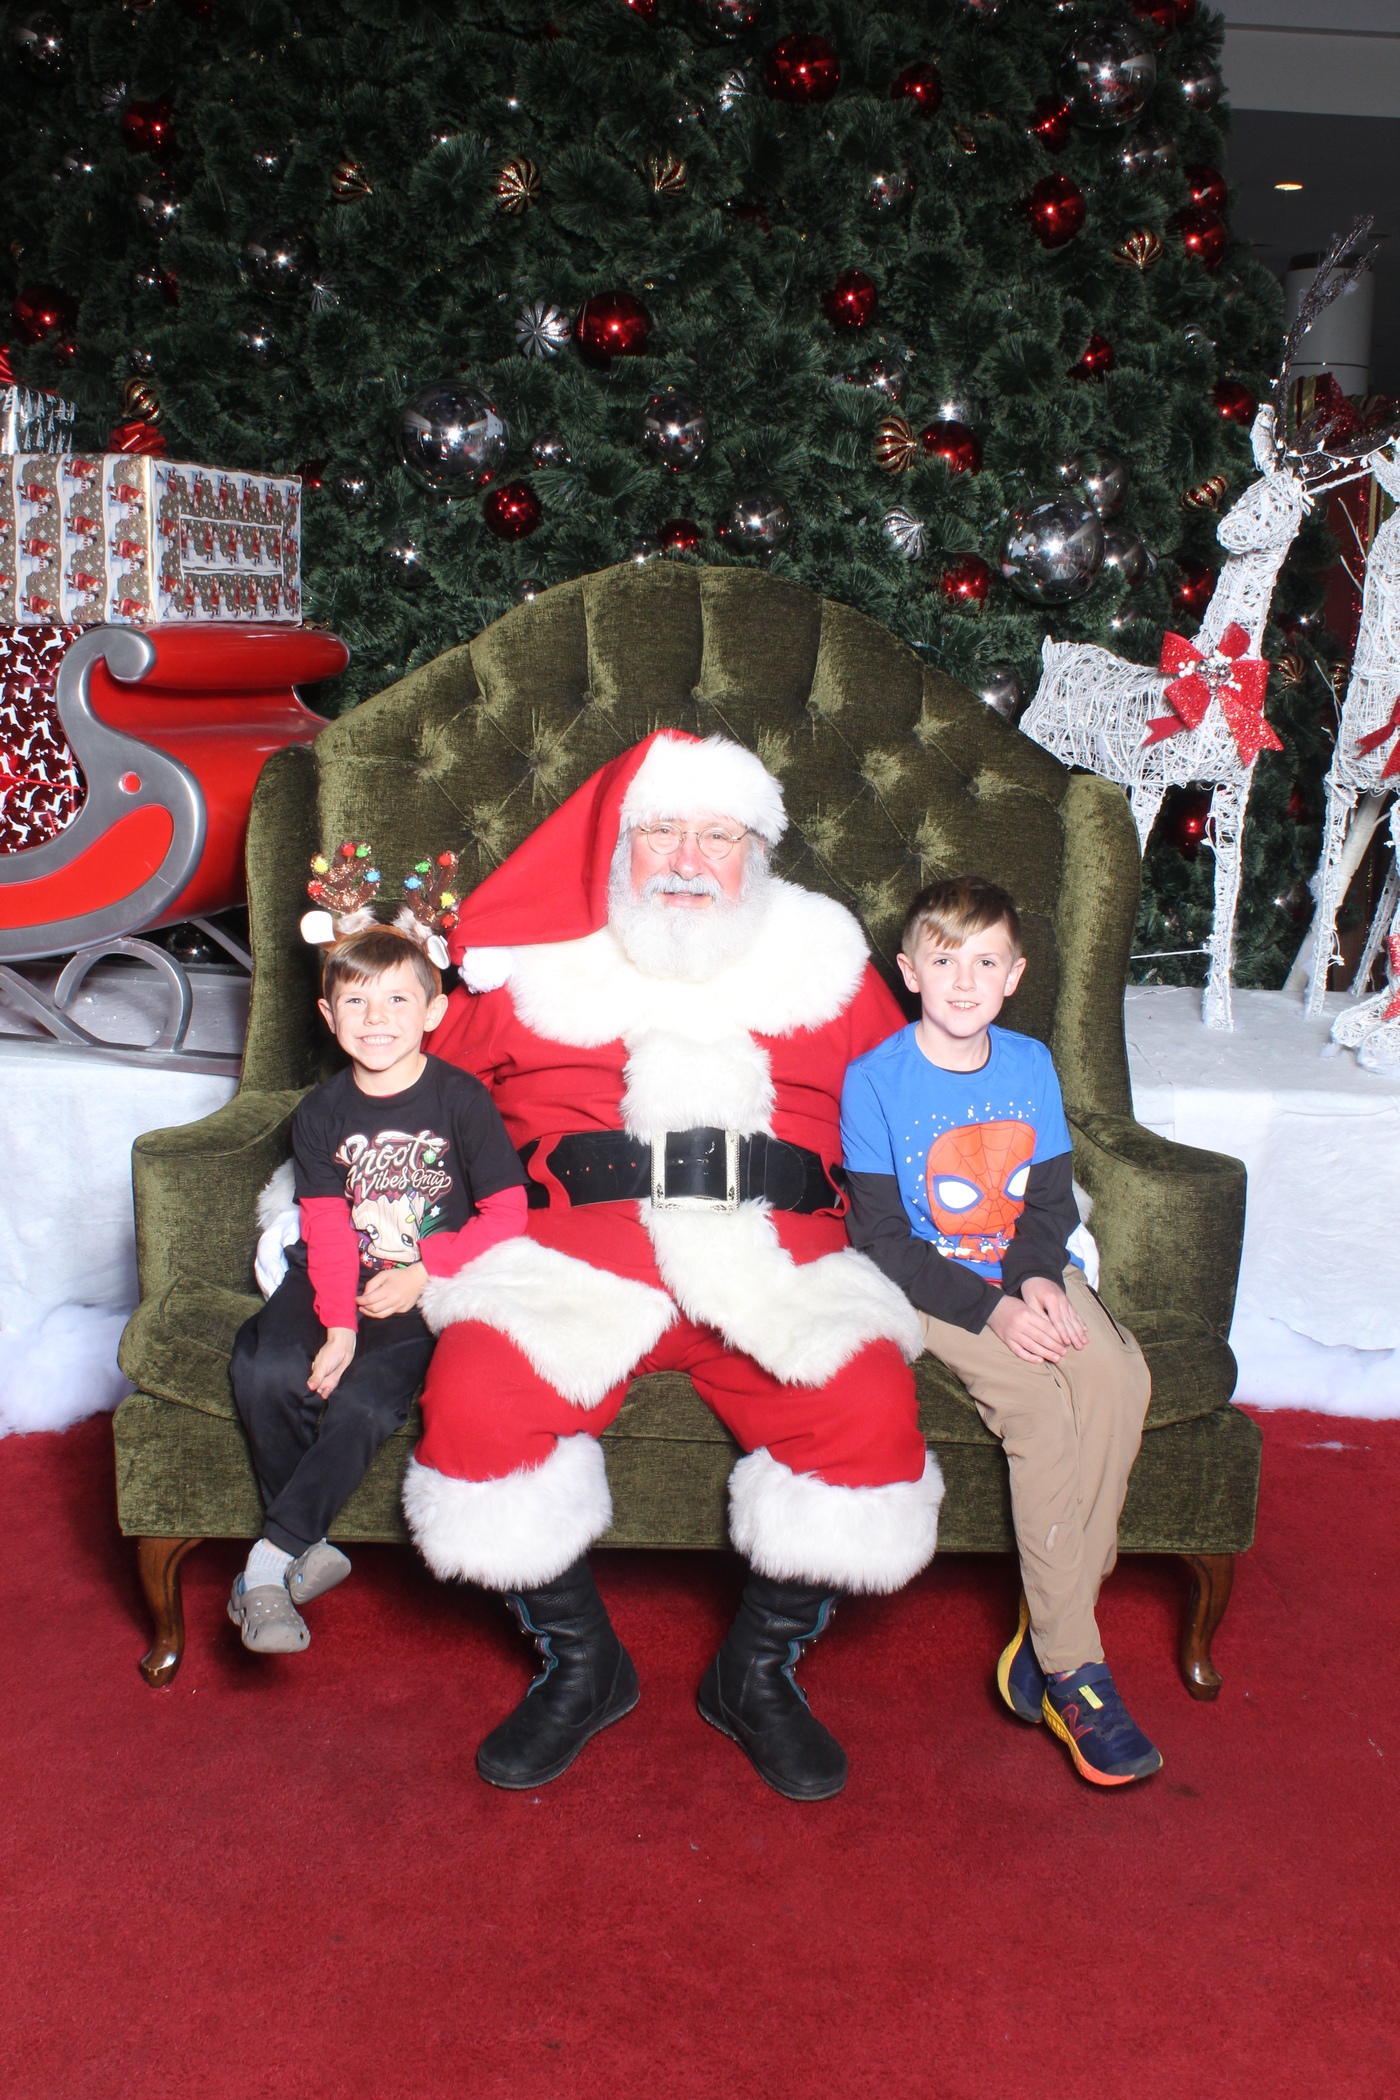 Where is Santa visit at Galleria Mall, from Cherry Hill Programs